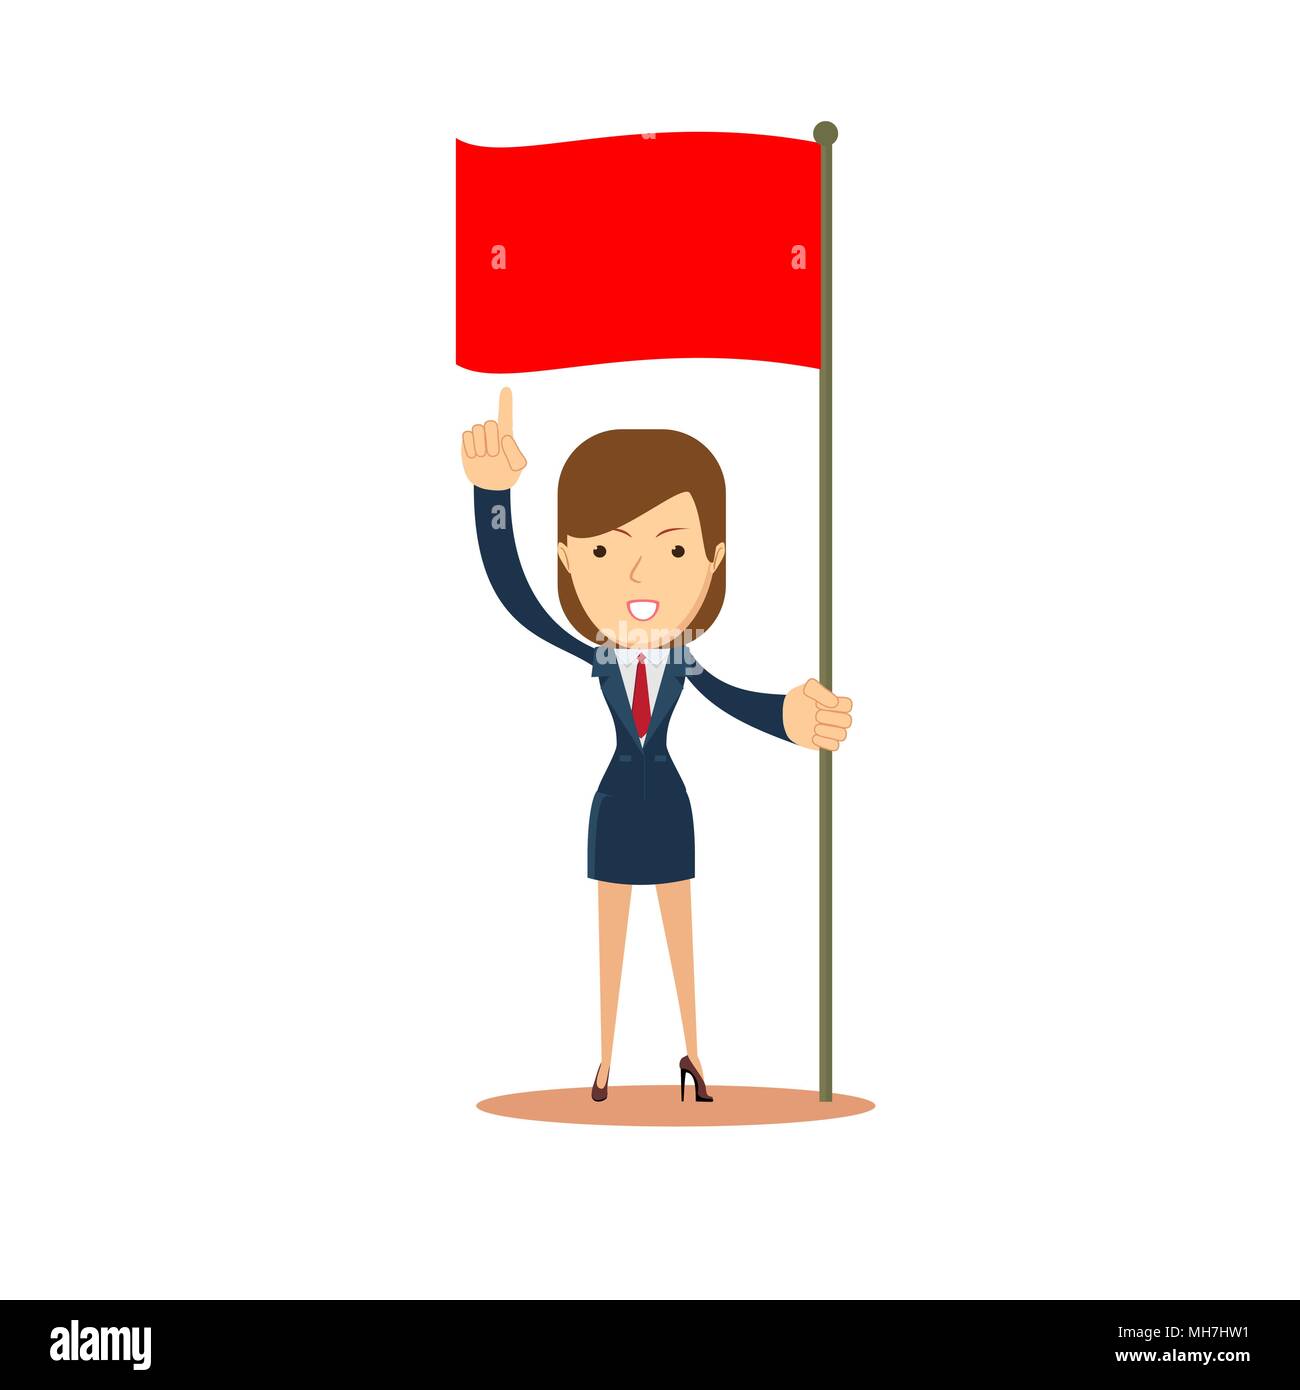 Woman holding red flag Stock Vector